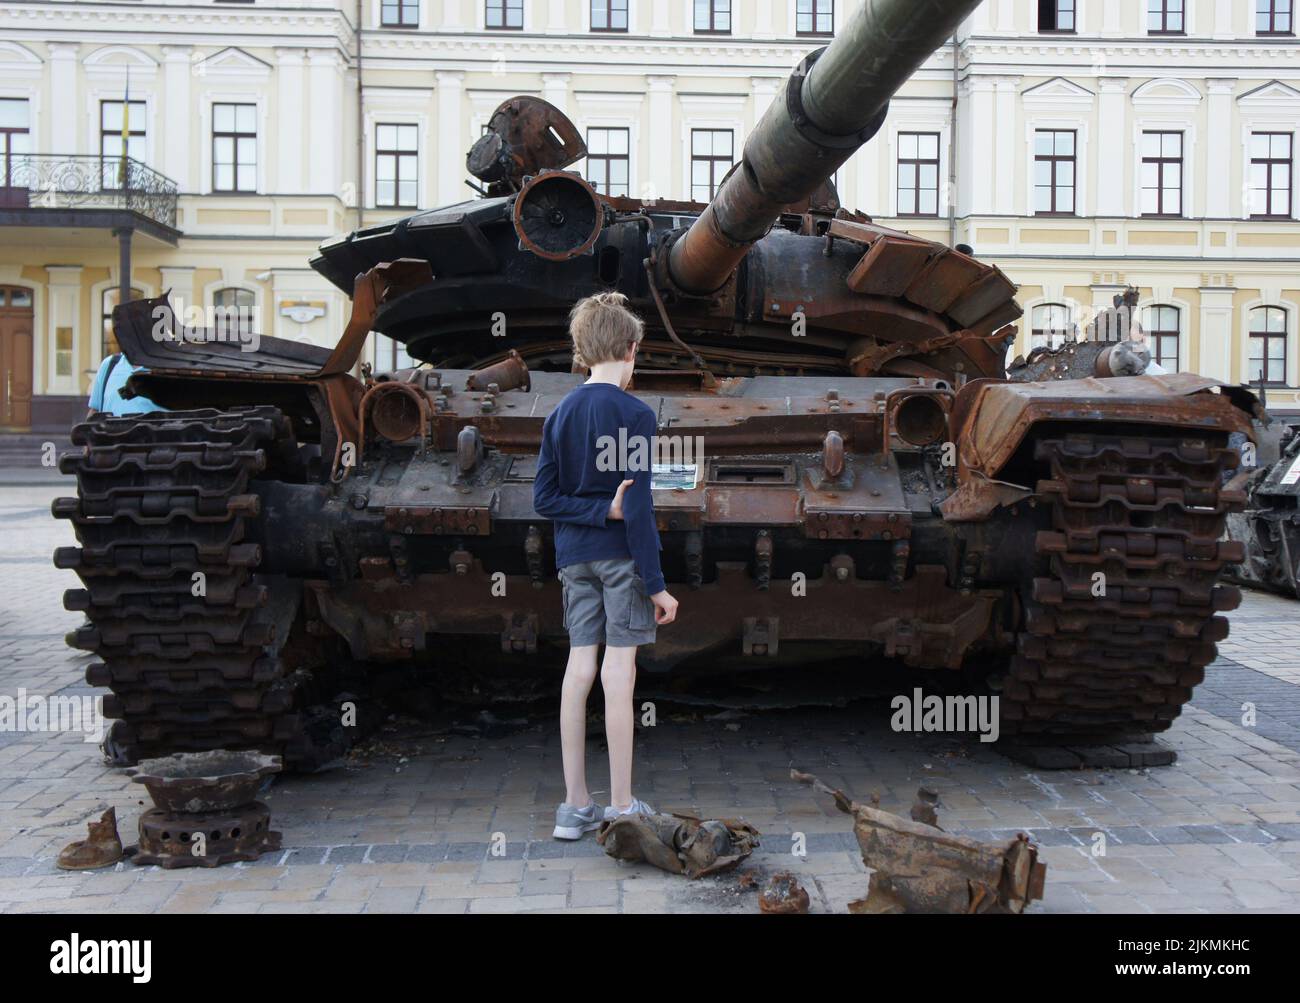 Kiev, Ukraine. 08-02-2022. A skinny boy looks at a burnt-out Russian tank during the Russian-Ukrainian conflict. The remains of a rusty military vehic Stock Photo